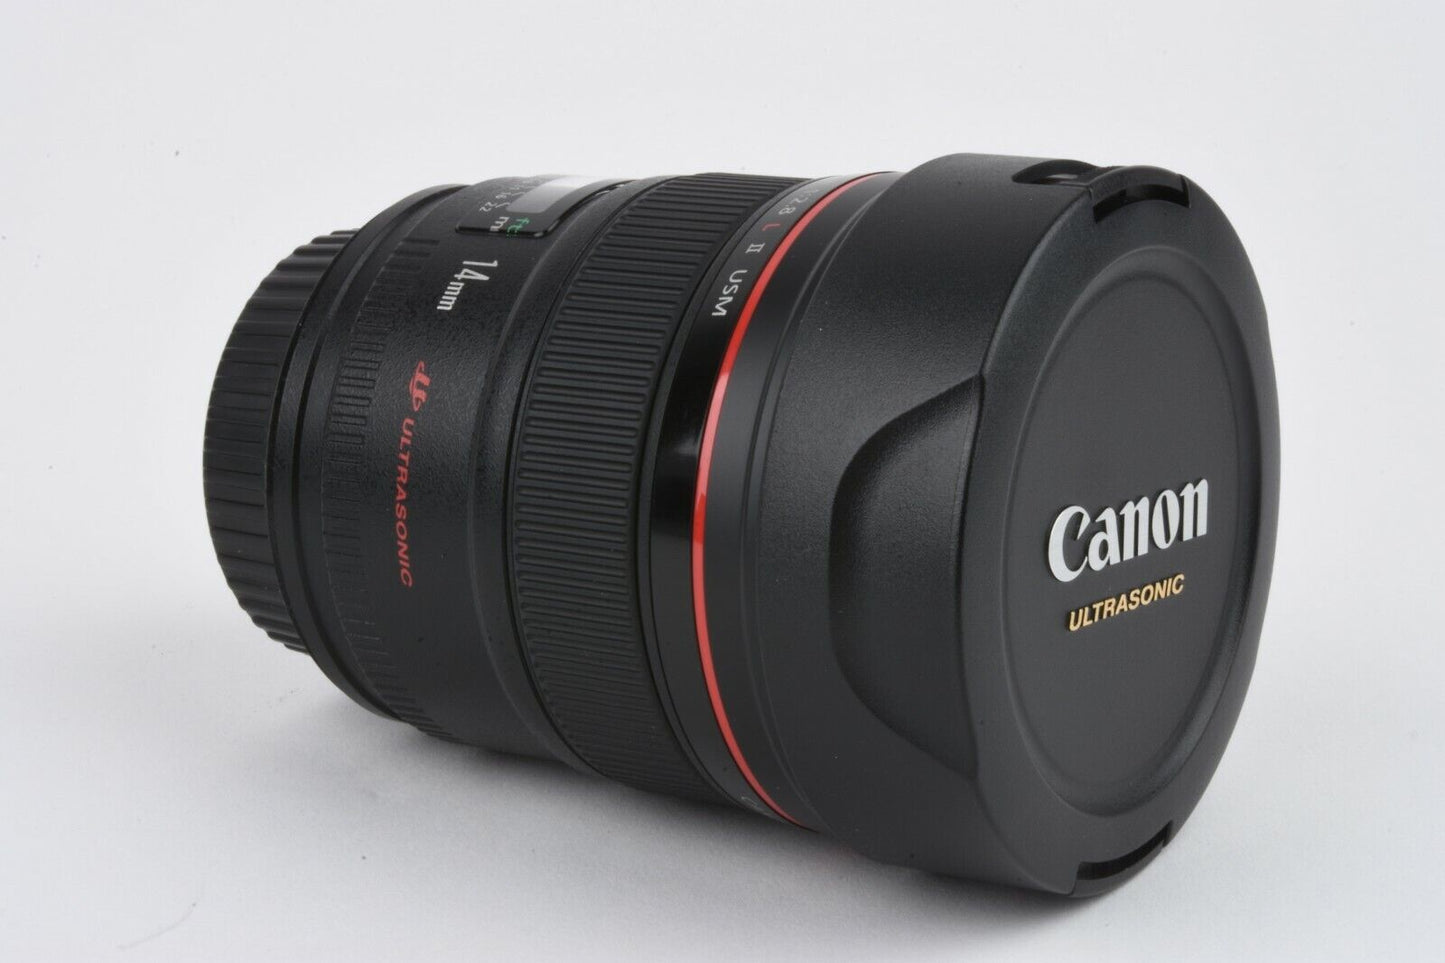 MINT- CANON EF 14mm f2.8L II USM WIDE ANGLE LENS, BOXED, POUCH, CAPS, USA, CLEAN